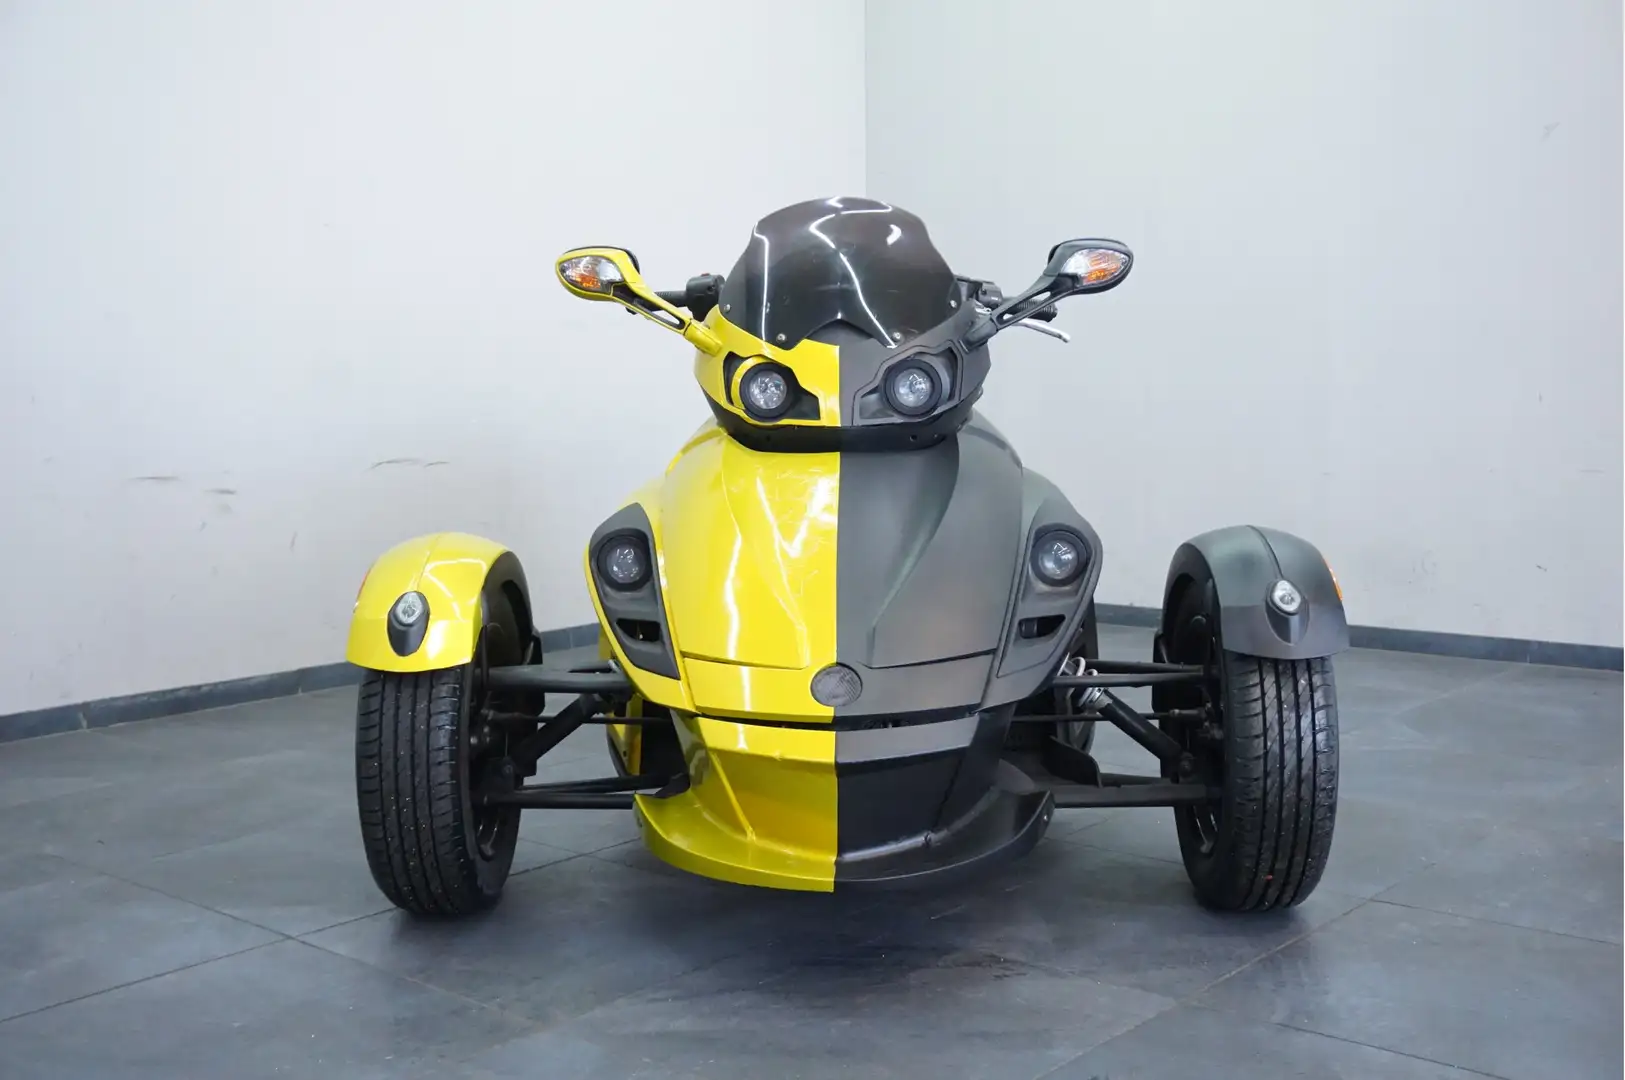 Others bra CAN-AM spider CAN-AM SPYDER Yellow - 2